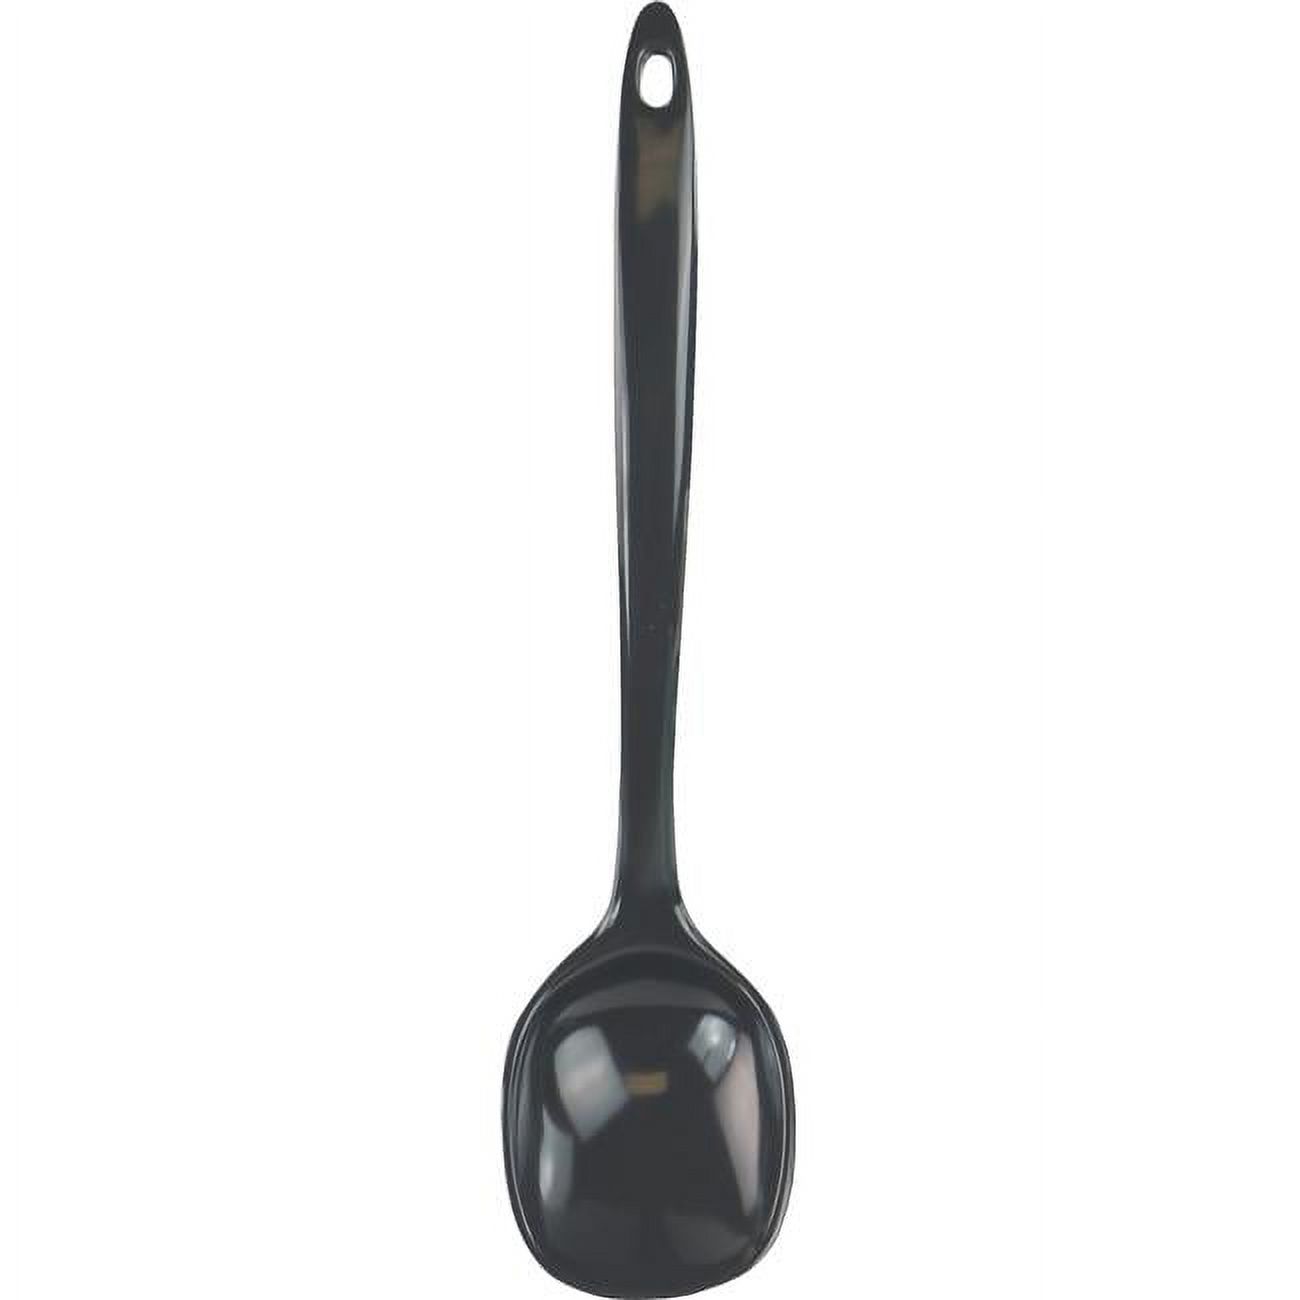 100% Organic Melamine Kitchen Cooking Spoon, Charcoal - image 1 of 2